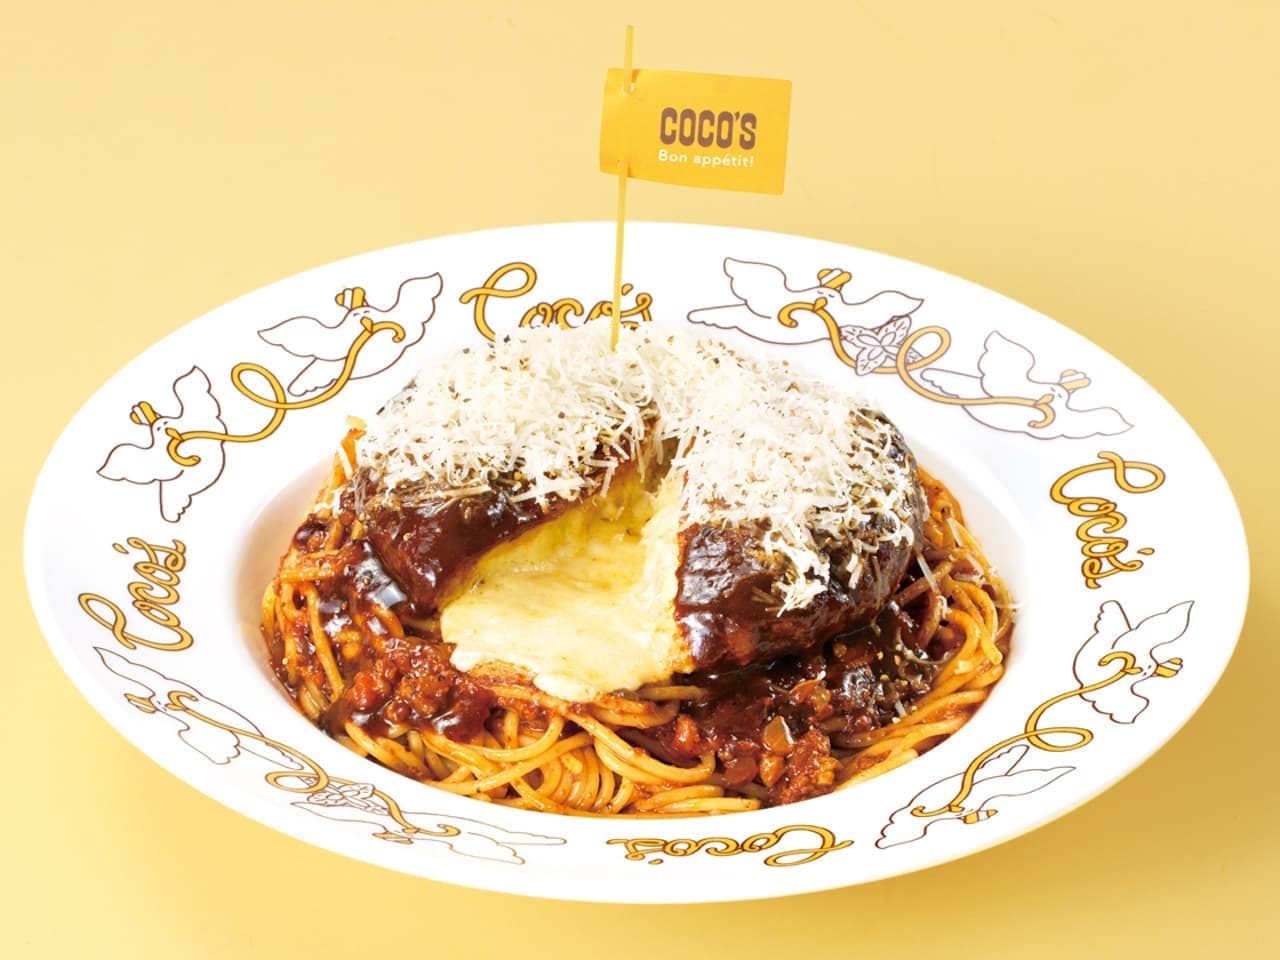 Cocos "Cheese in Hamburger Bolognese